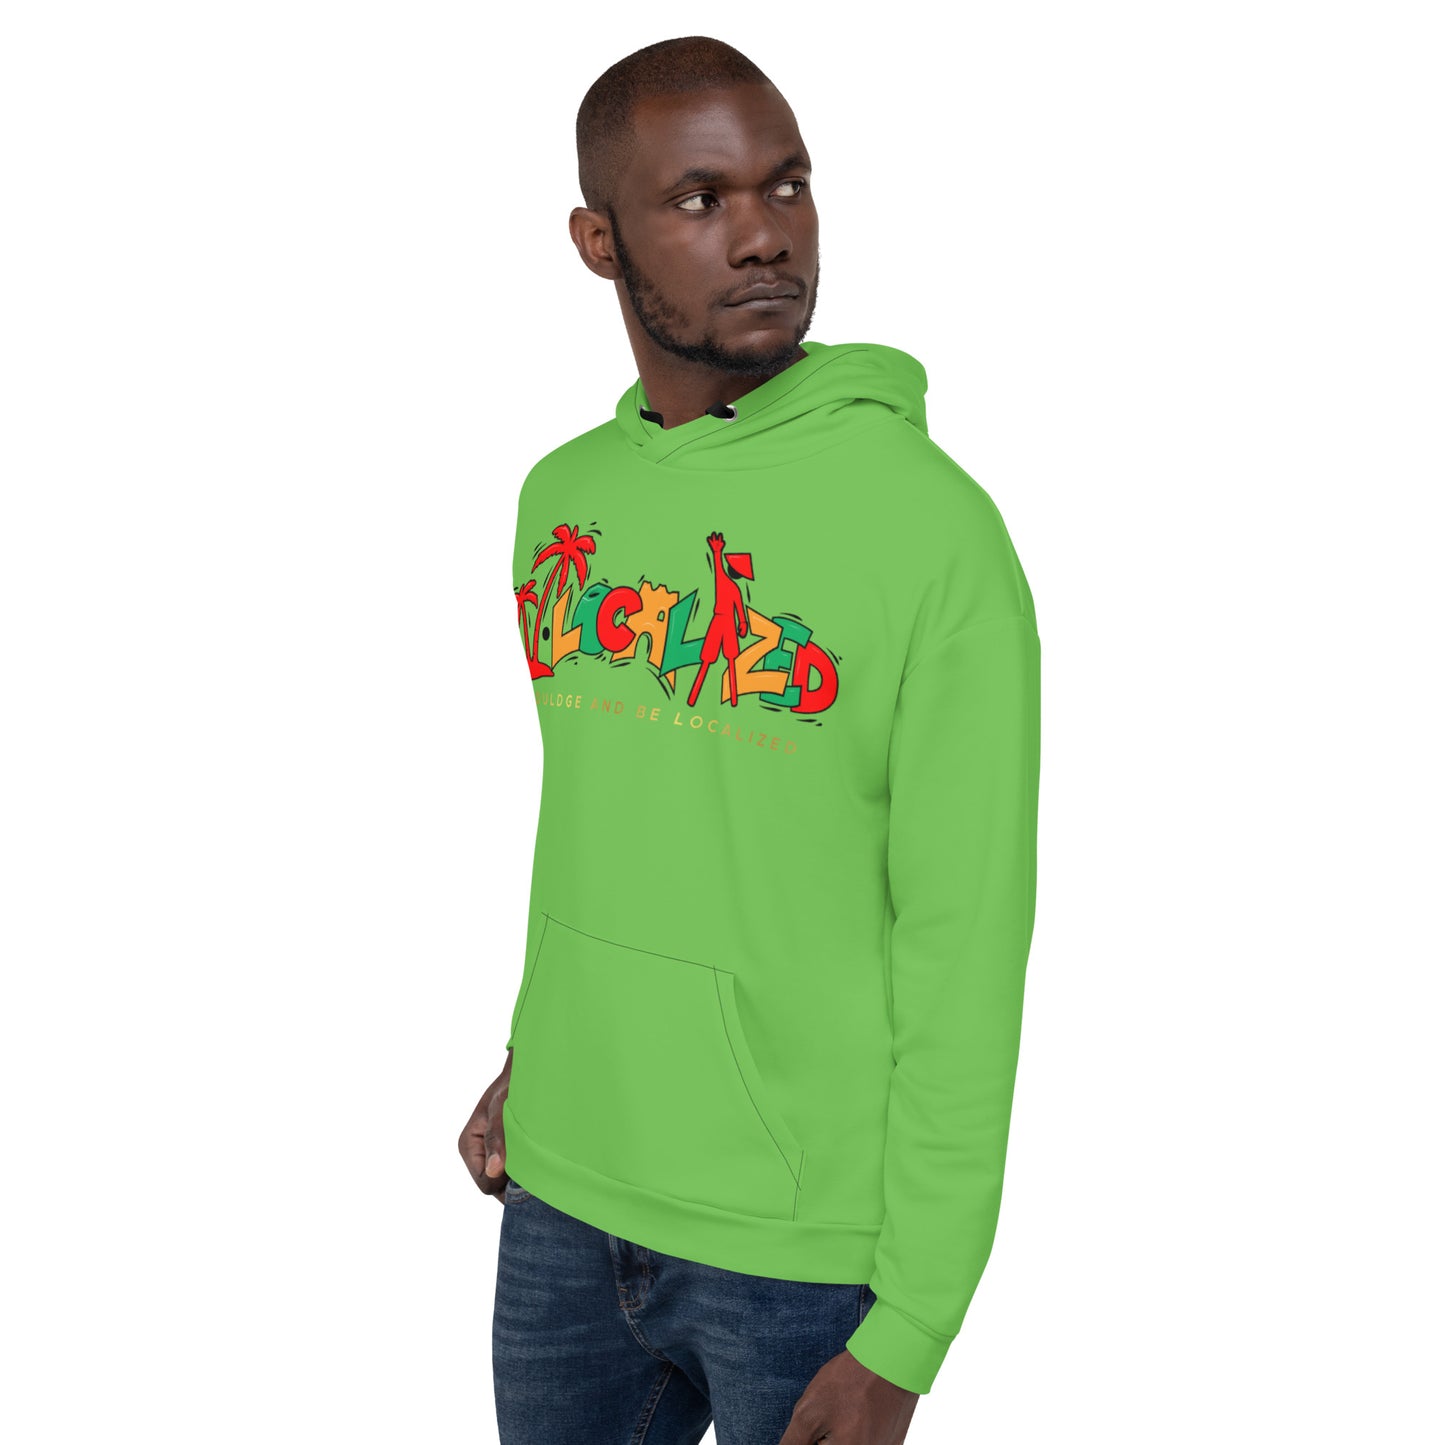 V.localized Kelly Green (Ice/Gold/Green) Unisex Hoodie